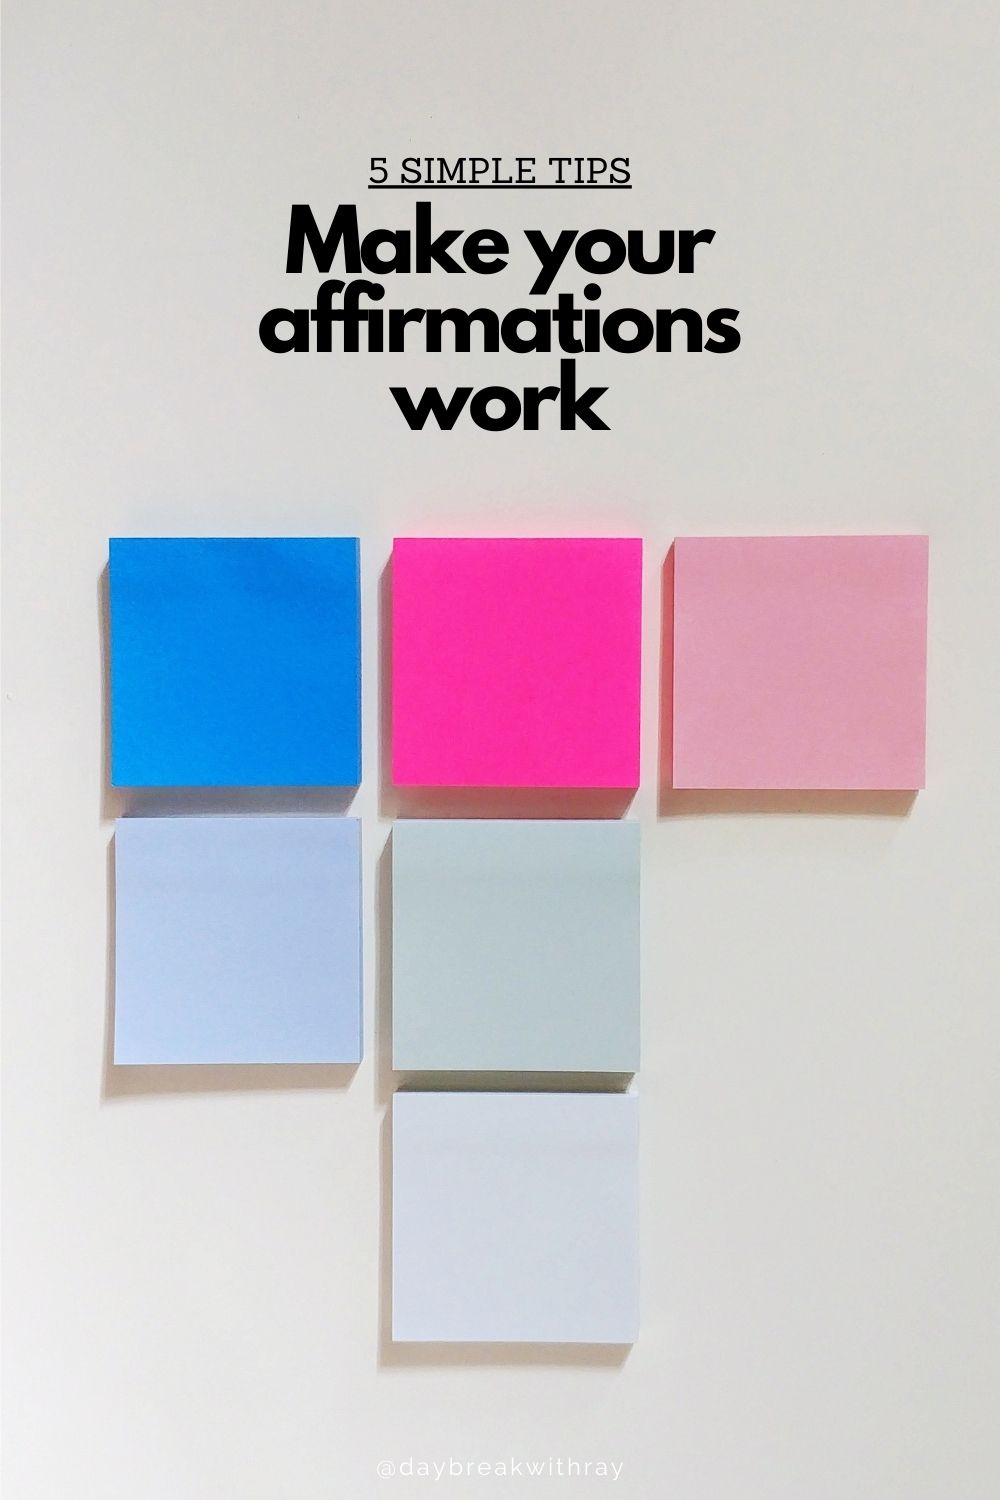 5 Simple Tips to Make Your Affirmations Work